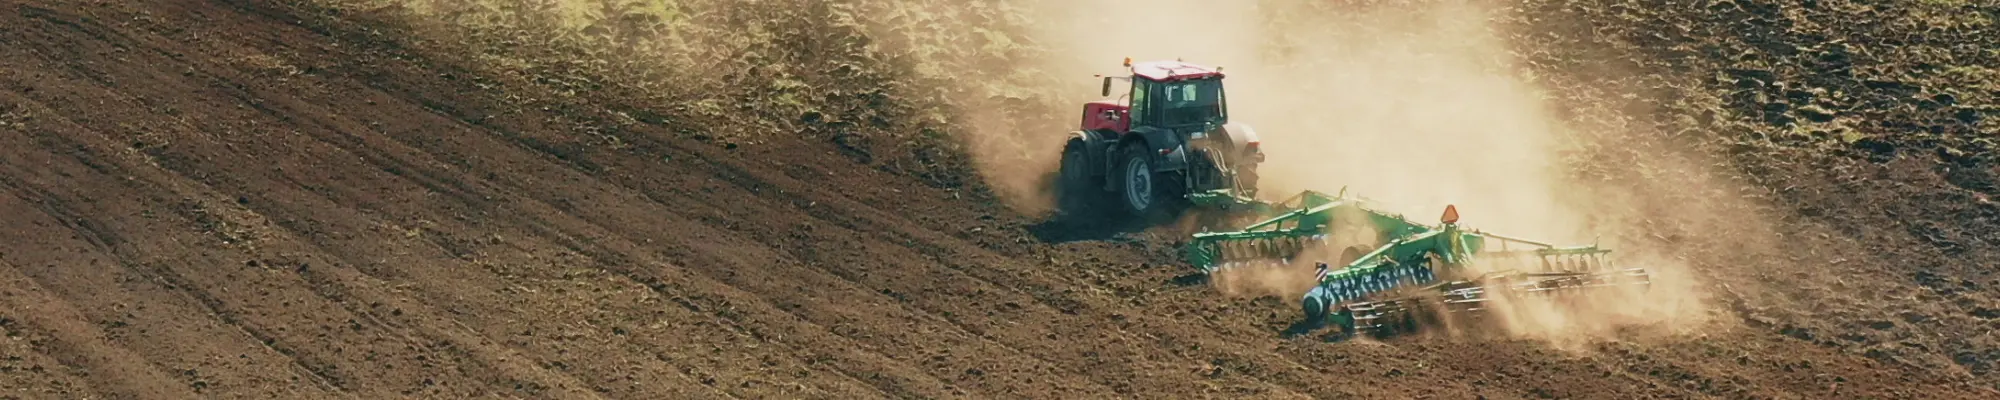 Tractor in action on the farm – Promoting eco-conscious agriculture with World Climate Farm Tool for carbon footprints